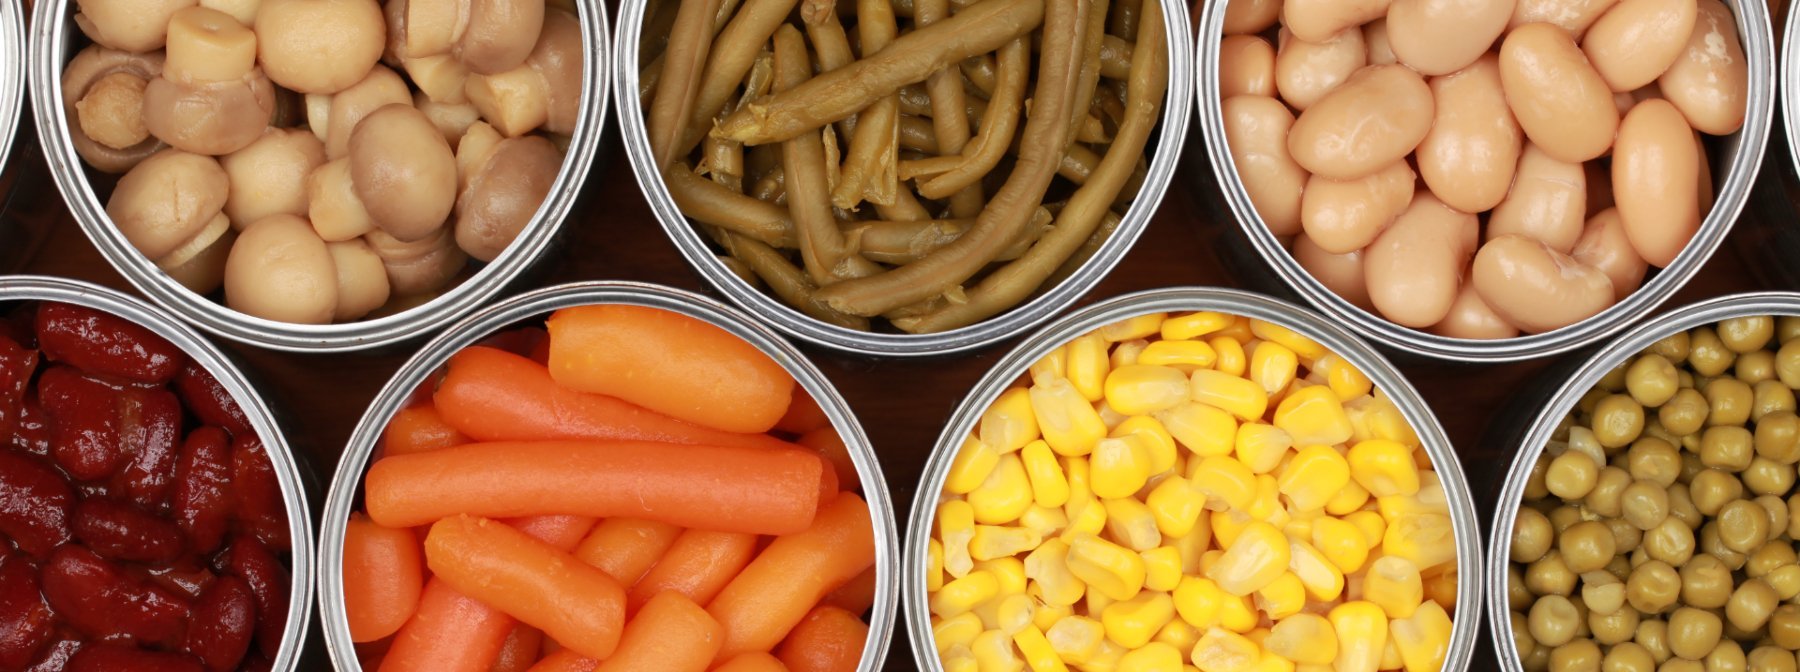 10 Nutrient-Dense Tinned Foods To Stock Up On